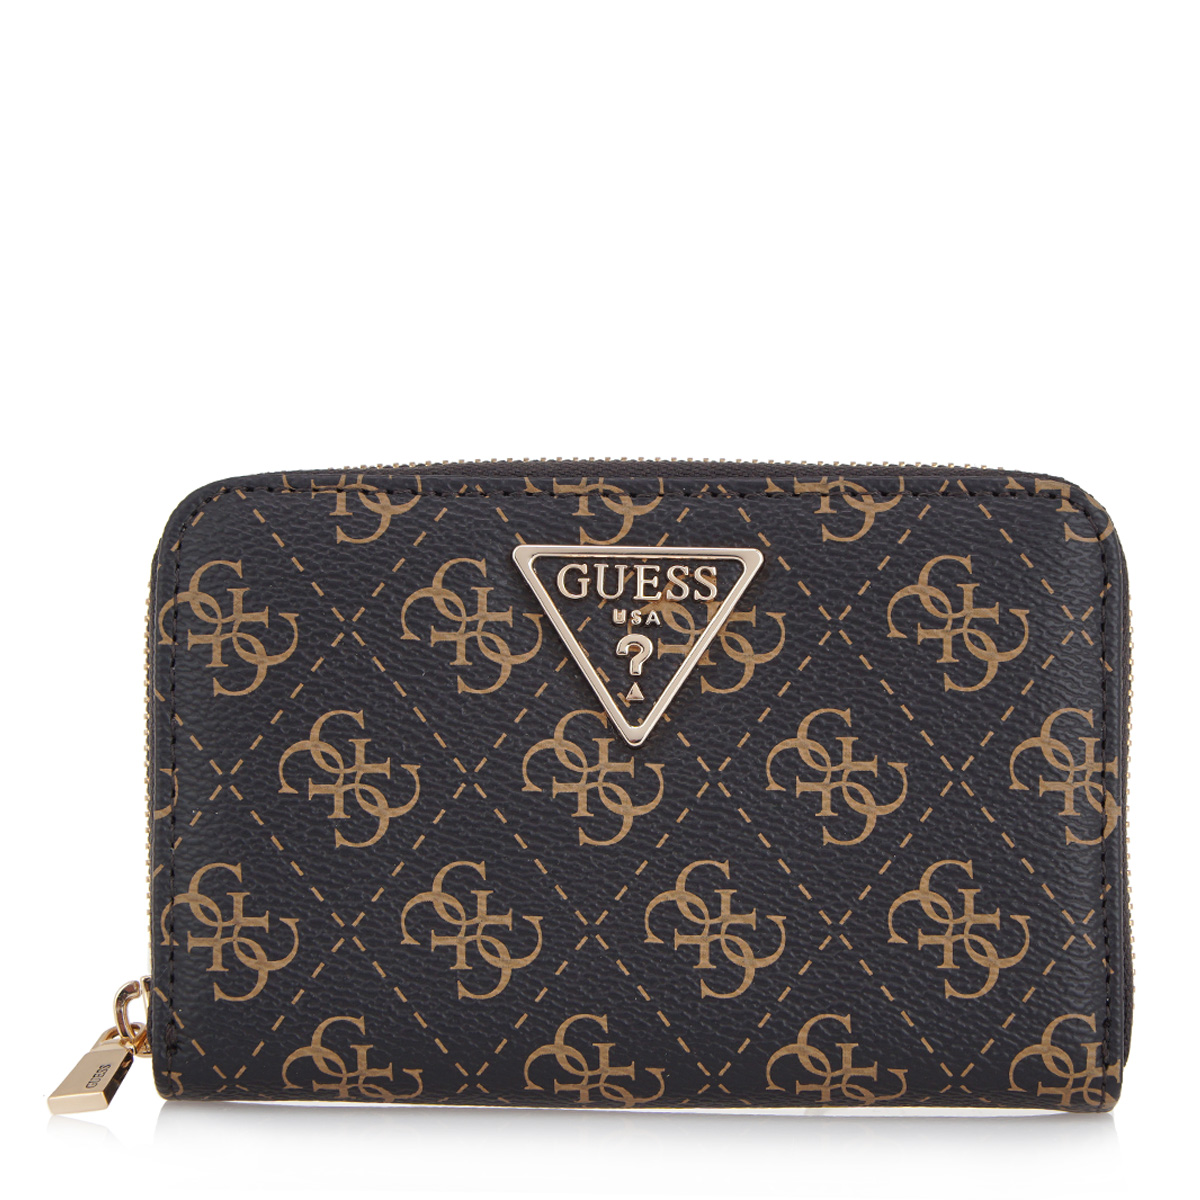 GUESS wallets new - Brown